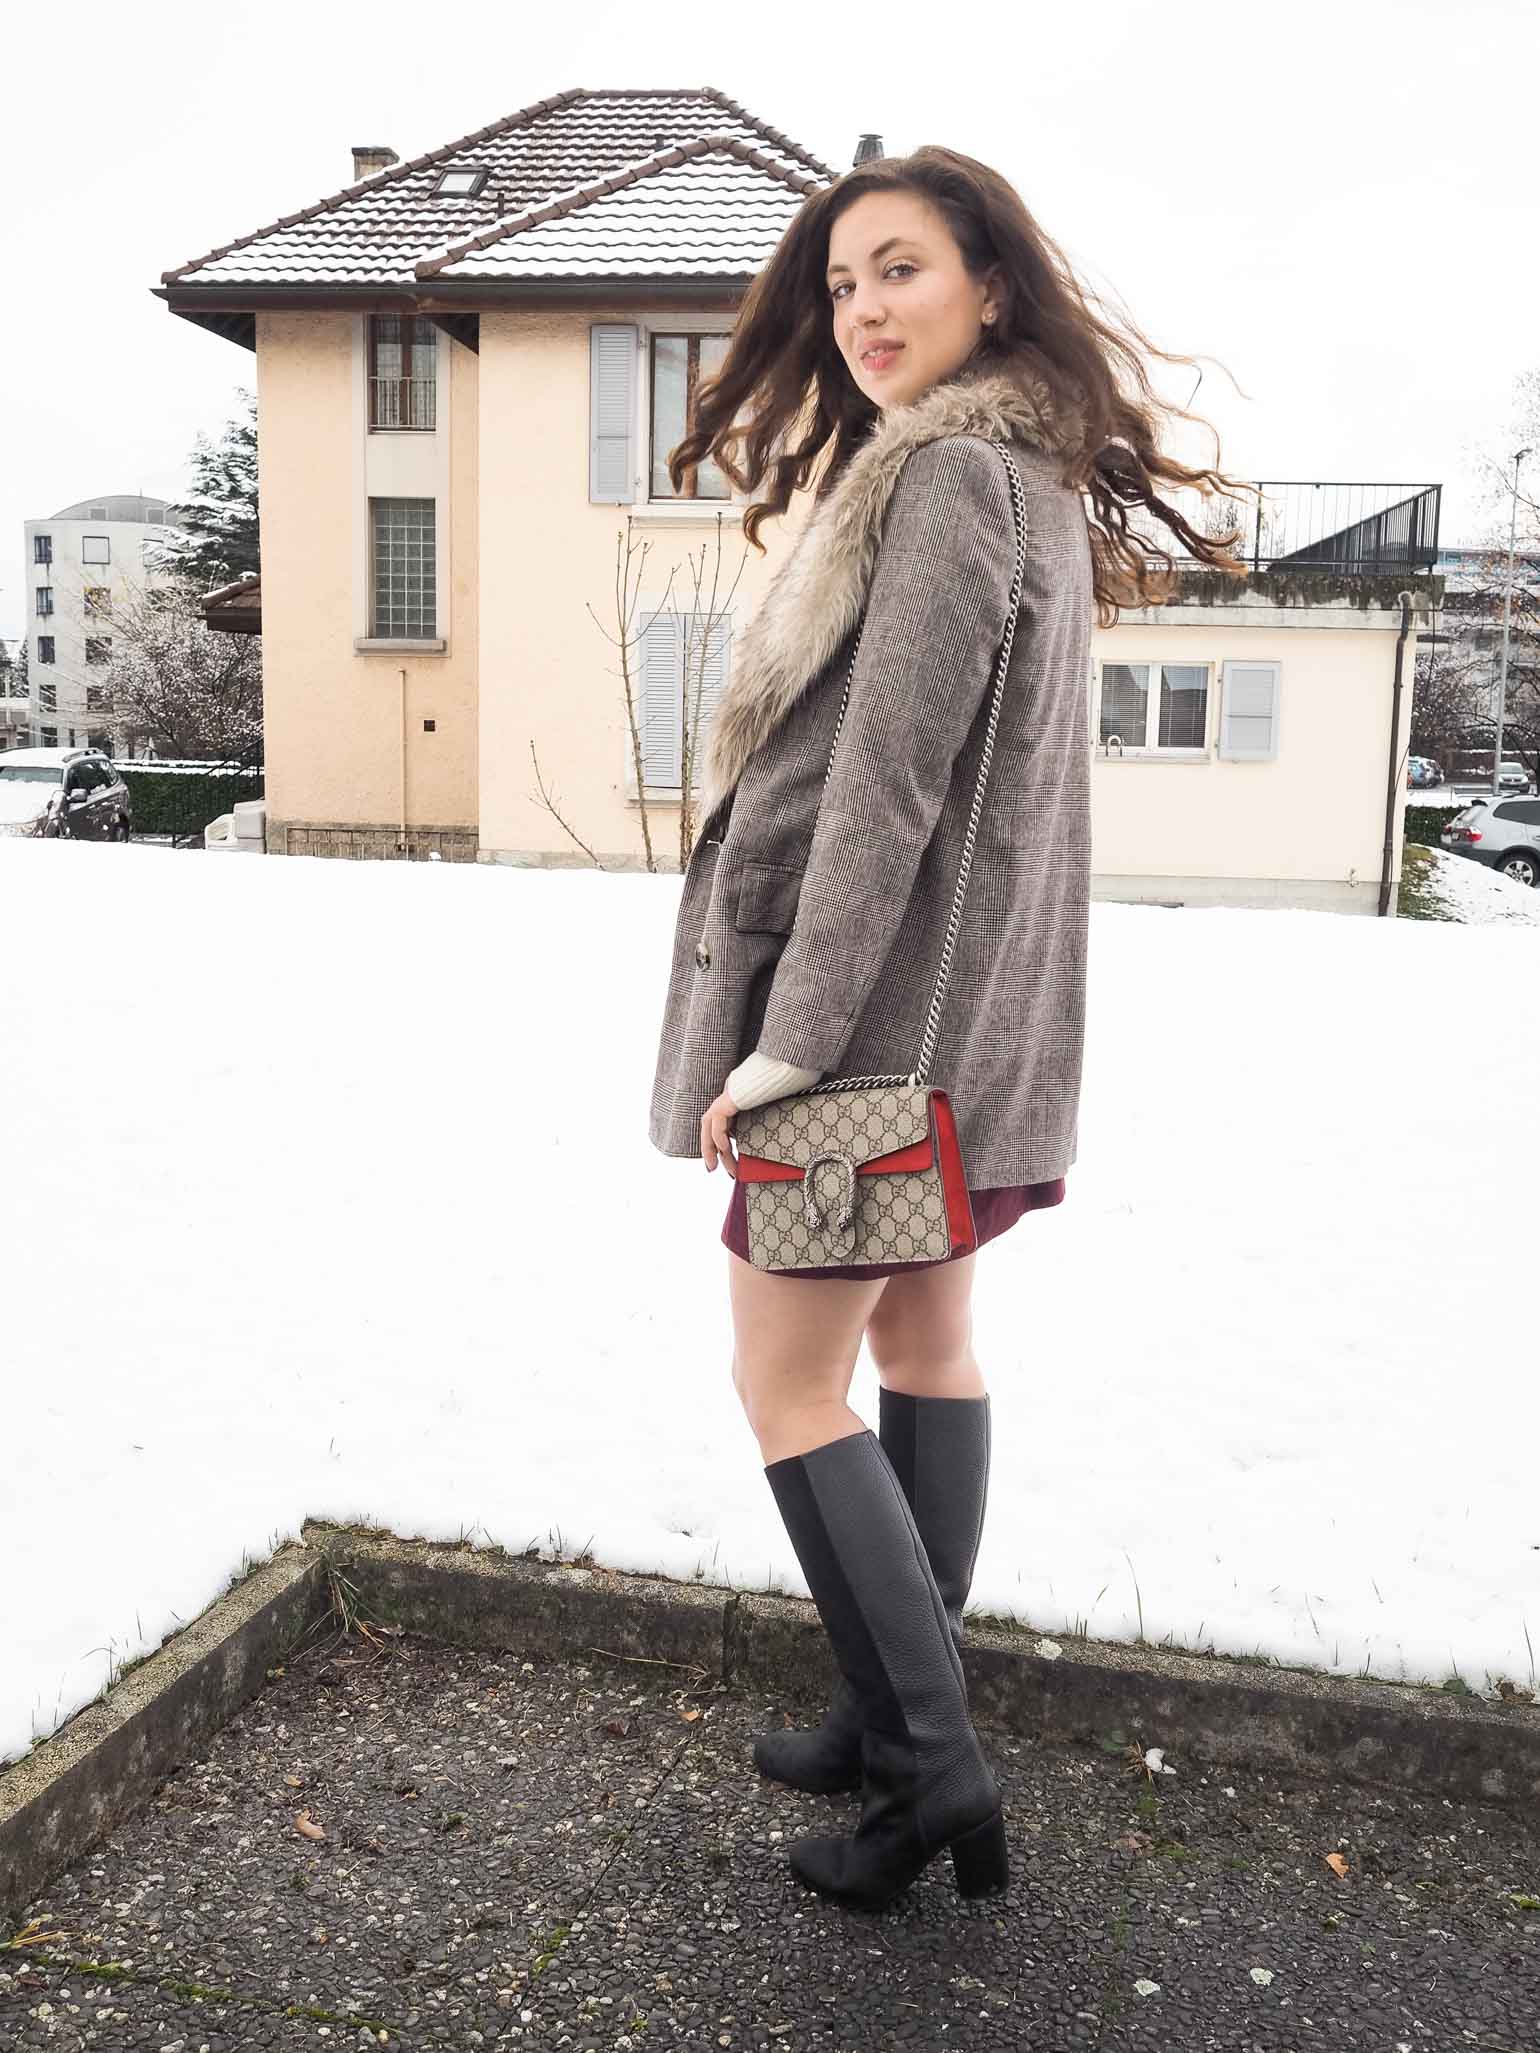 I'm in the Christmas Spirit: Plaid Holiday Look - The Brunette Nomad, Dallas fashion blogger